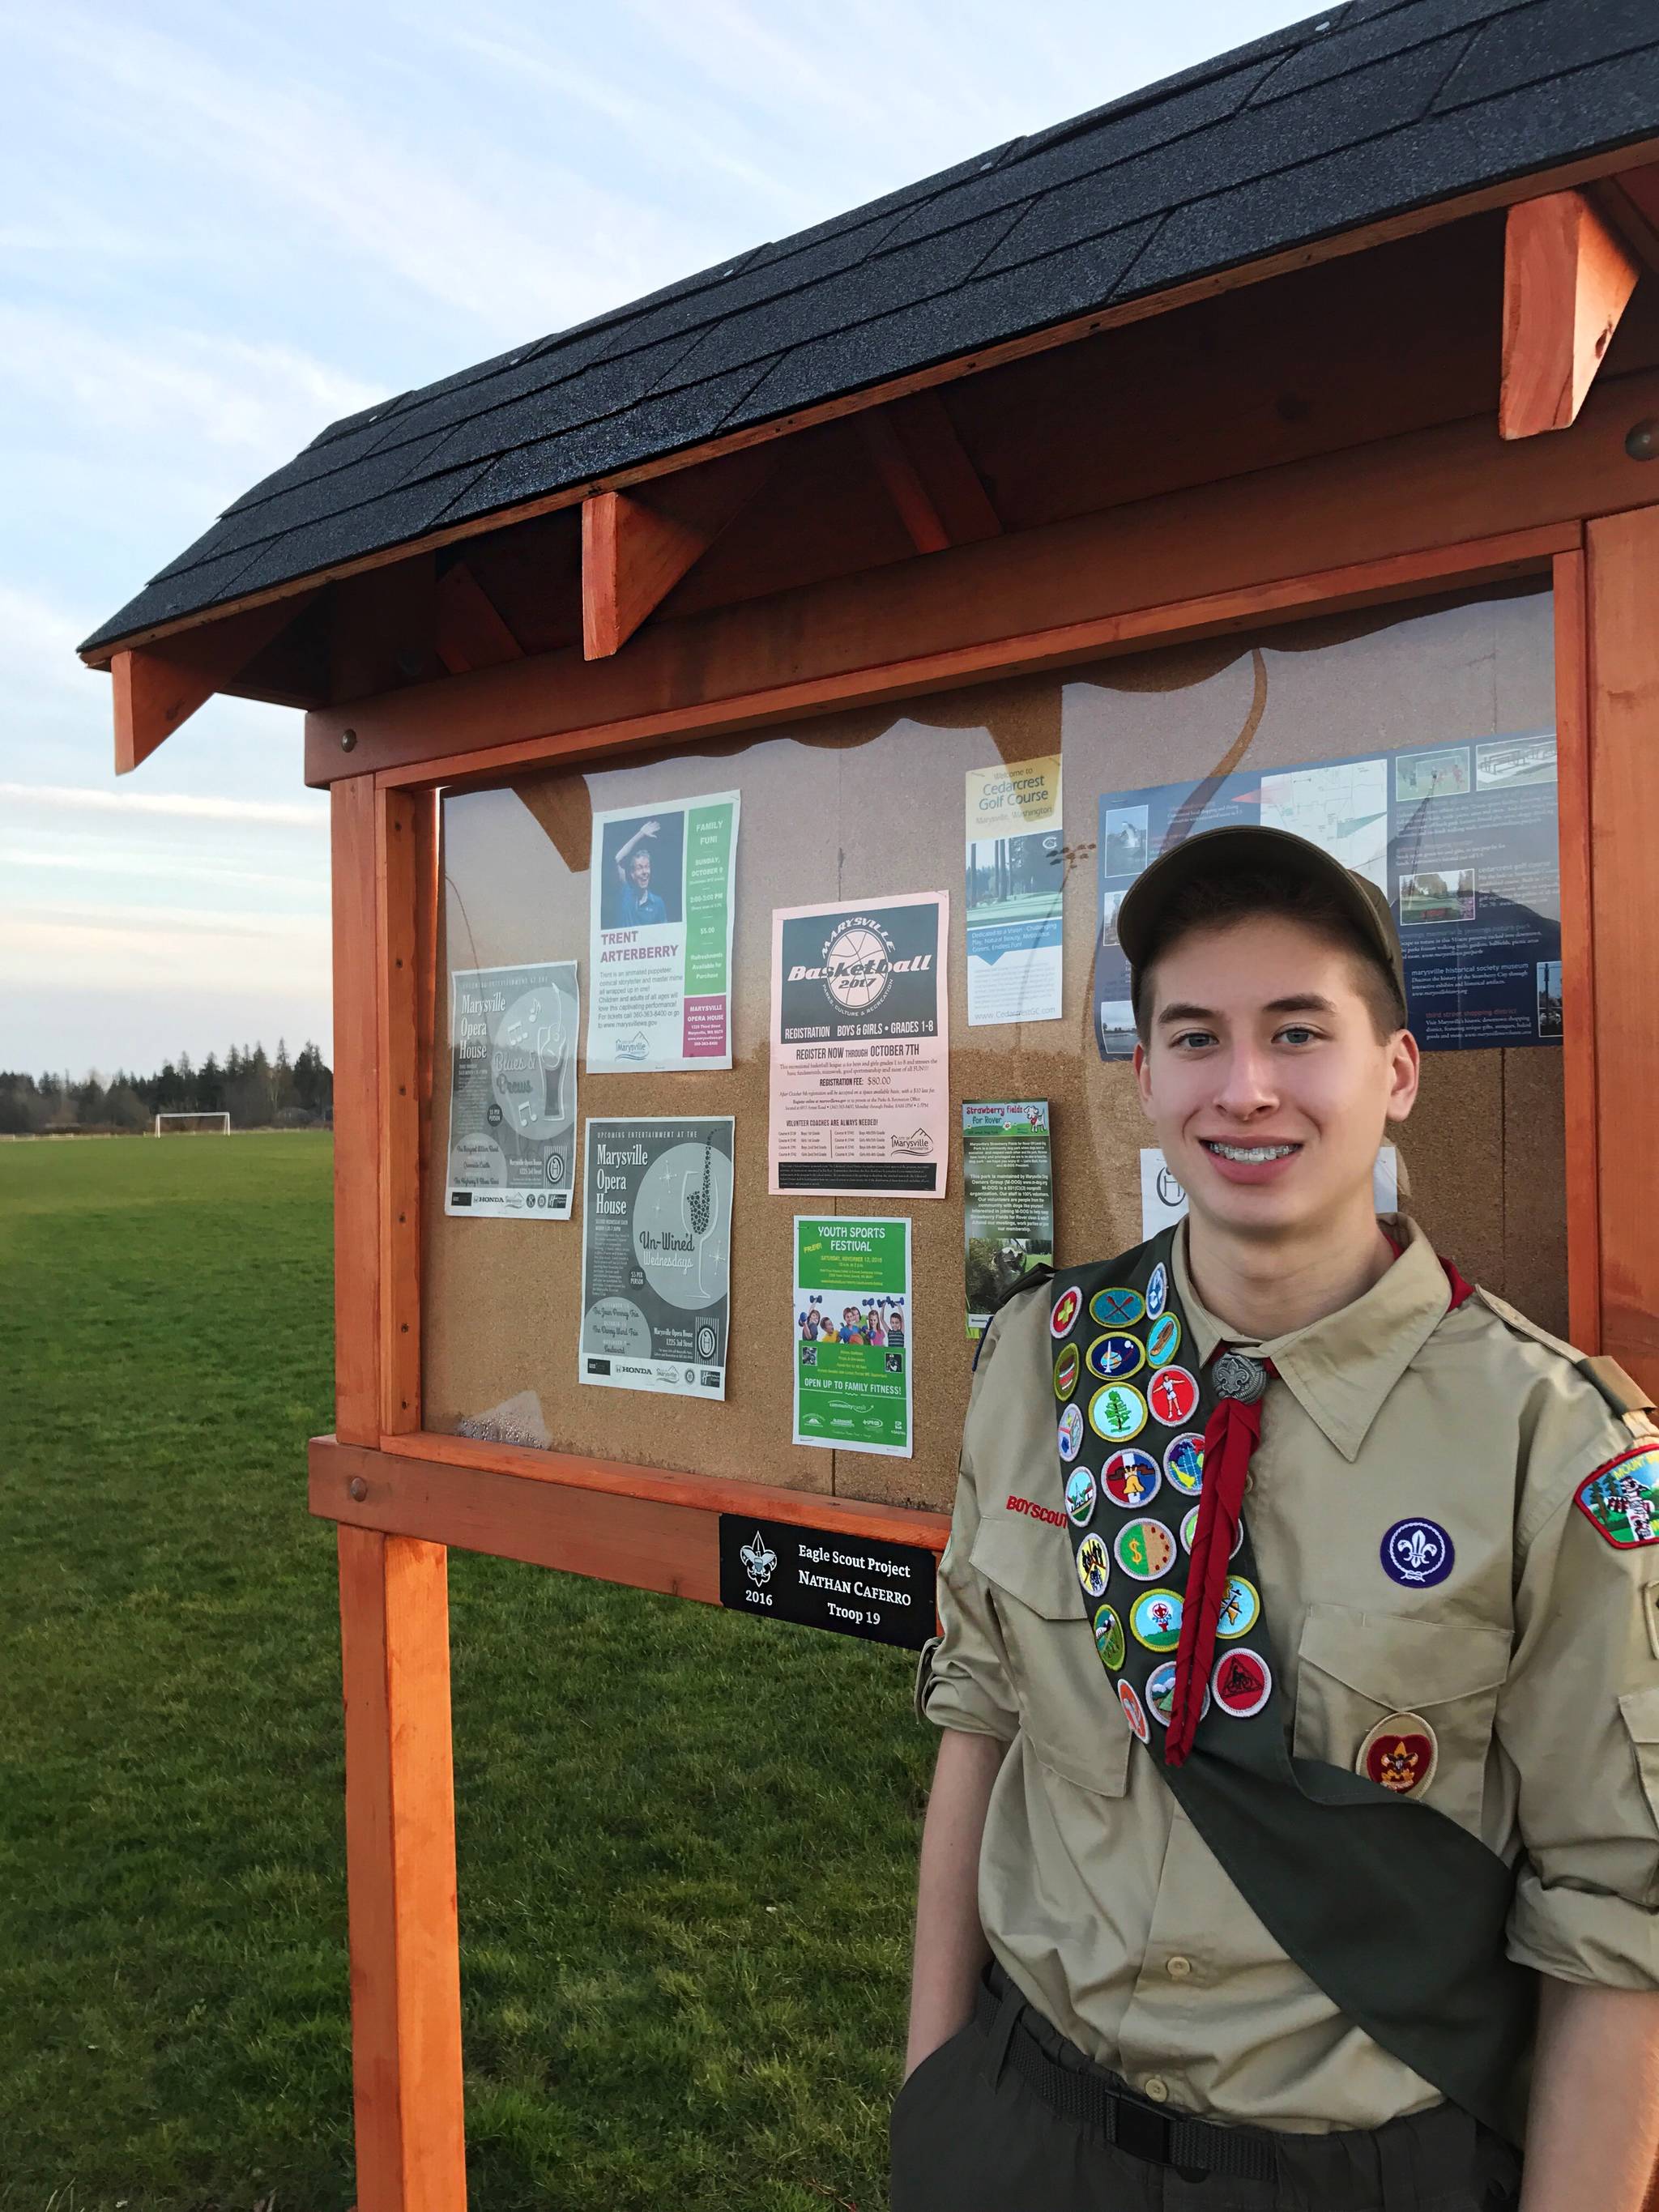 Kiosk at soccer field earns teen Eagle Scout status